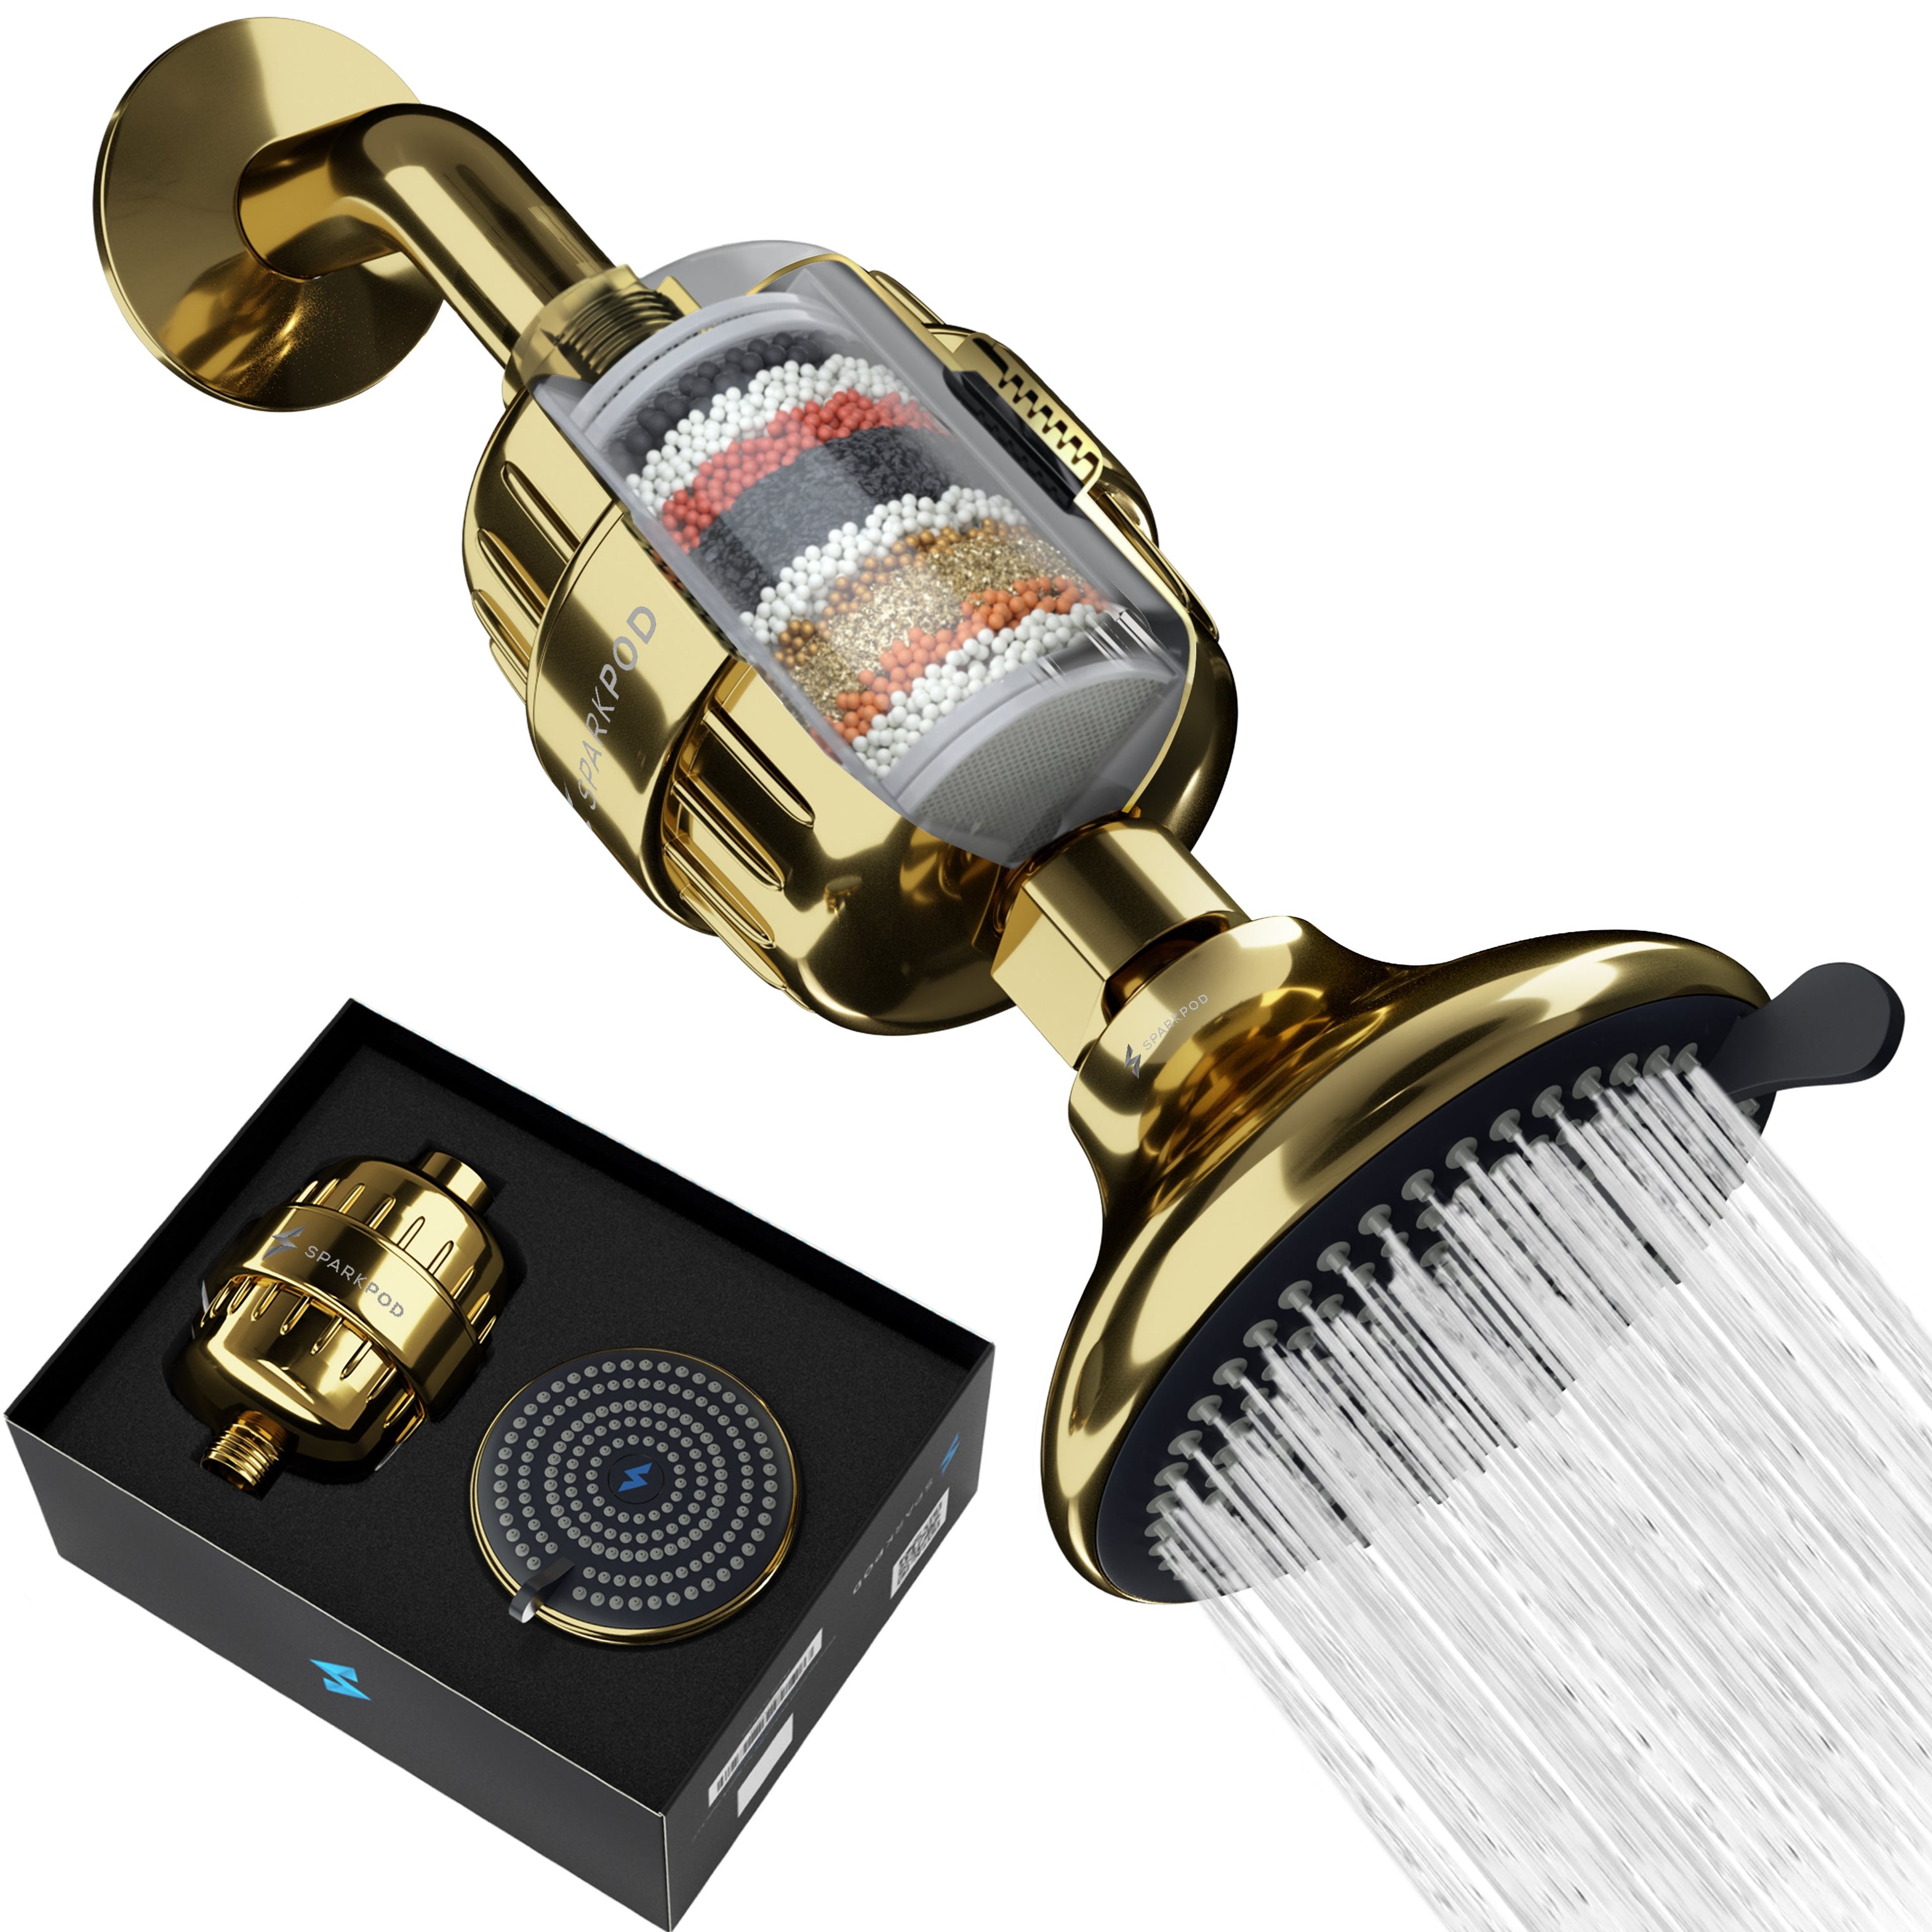 Luxury Filtered Shower Head Set 23 Stage Shower Filter - Removes Chlorine and Heavy Metals - Multi-Spray Settings 4" Showerhead Filter by SparkPod